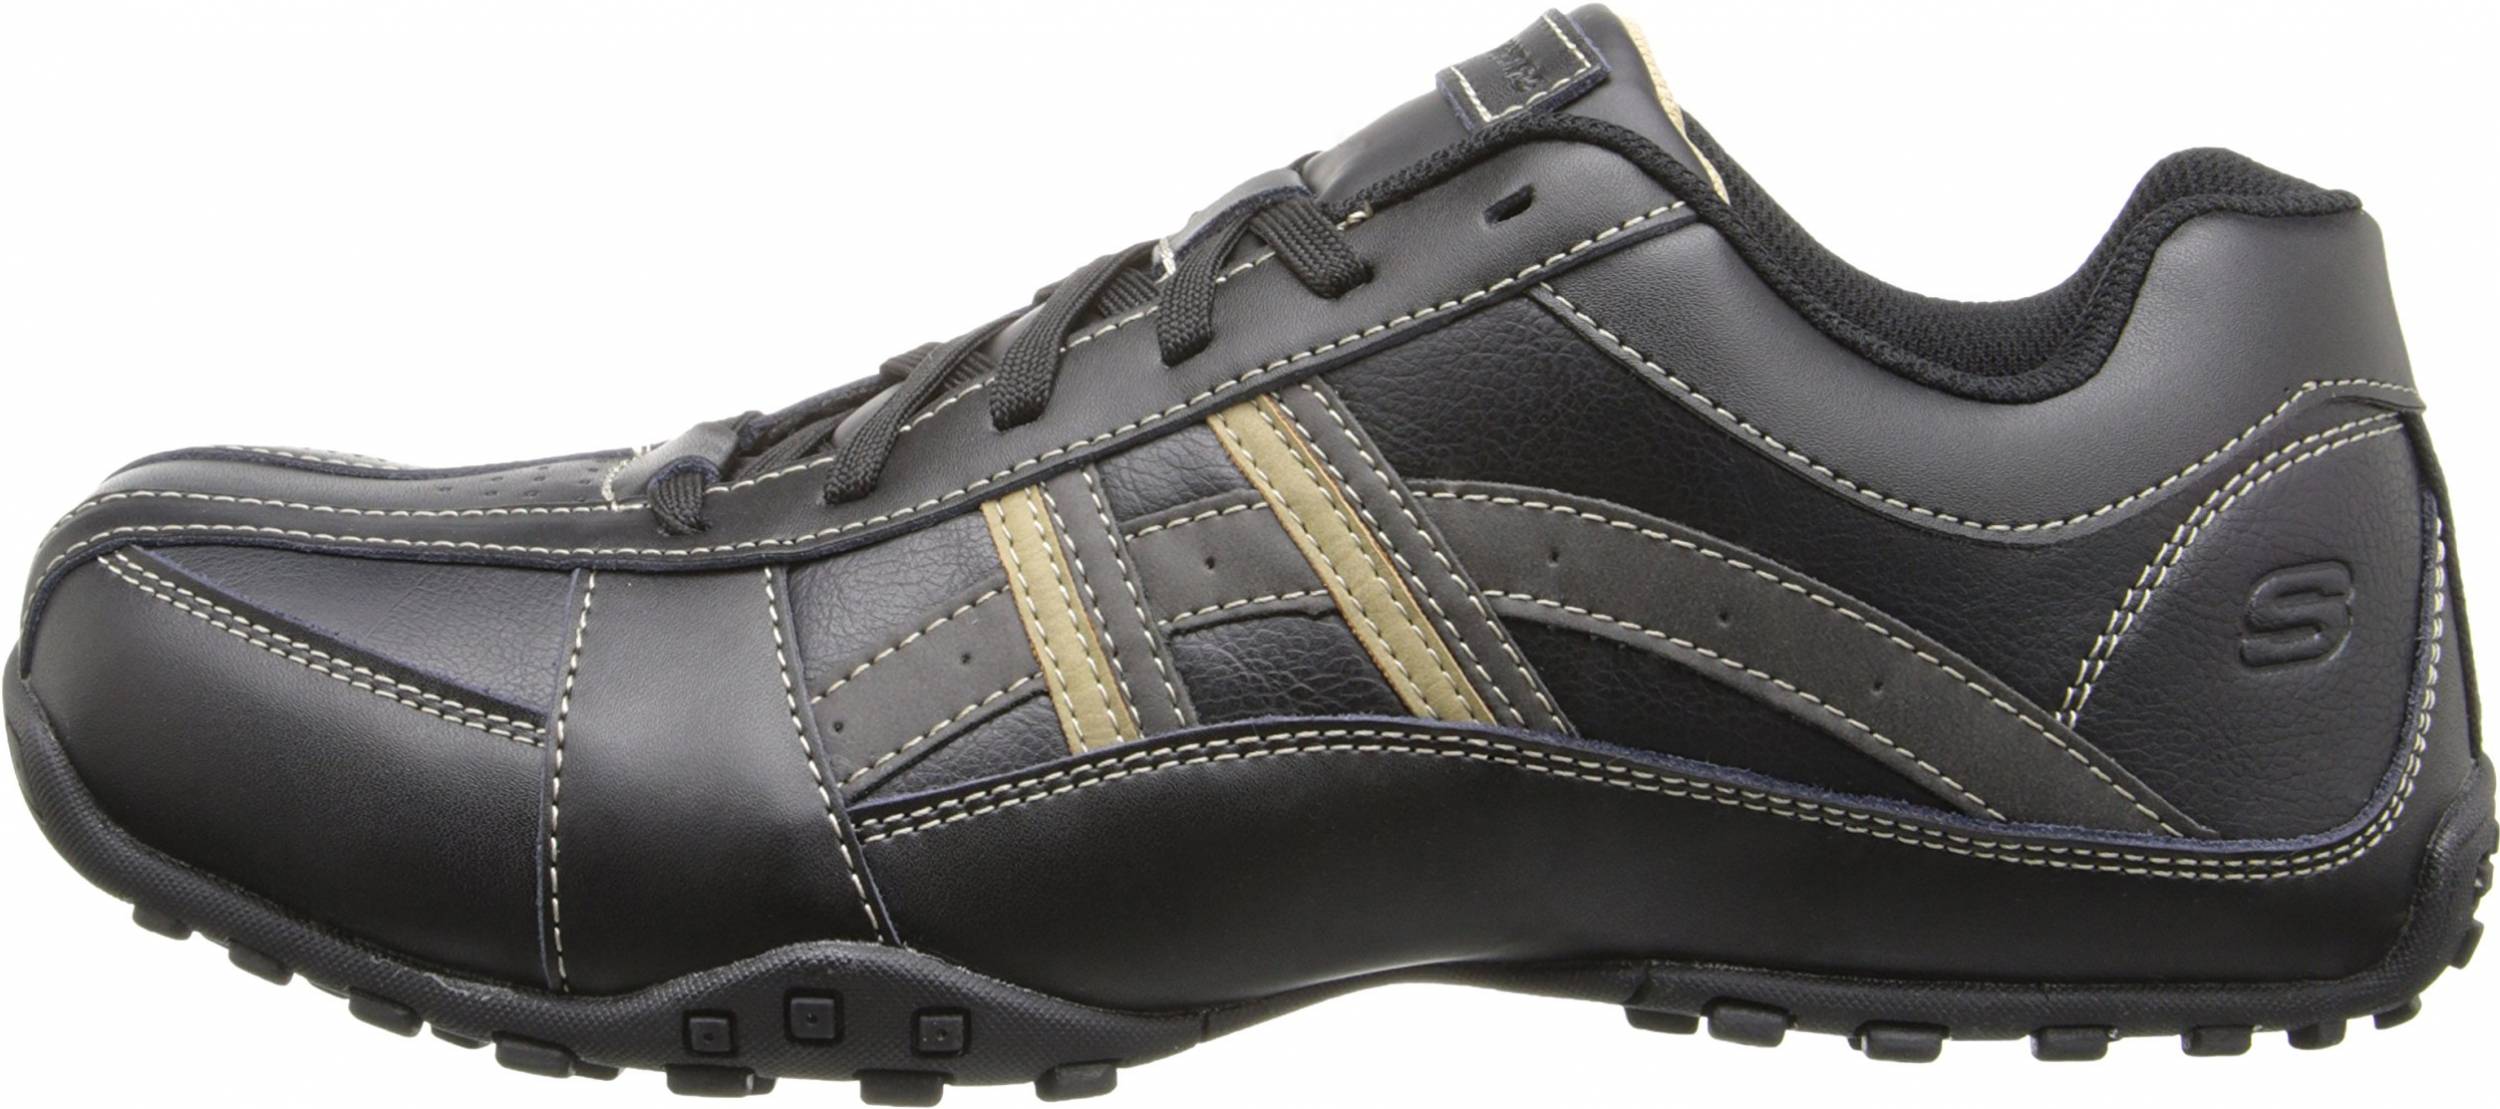 skechers black leather tennis shoes